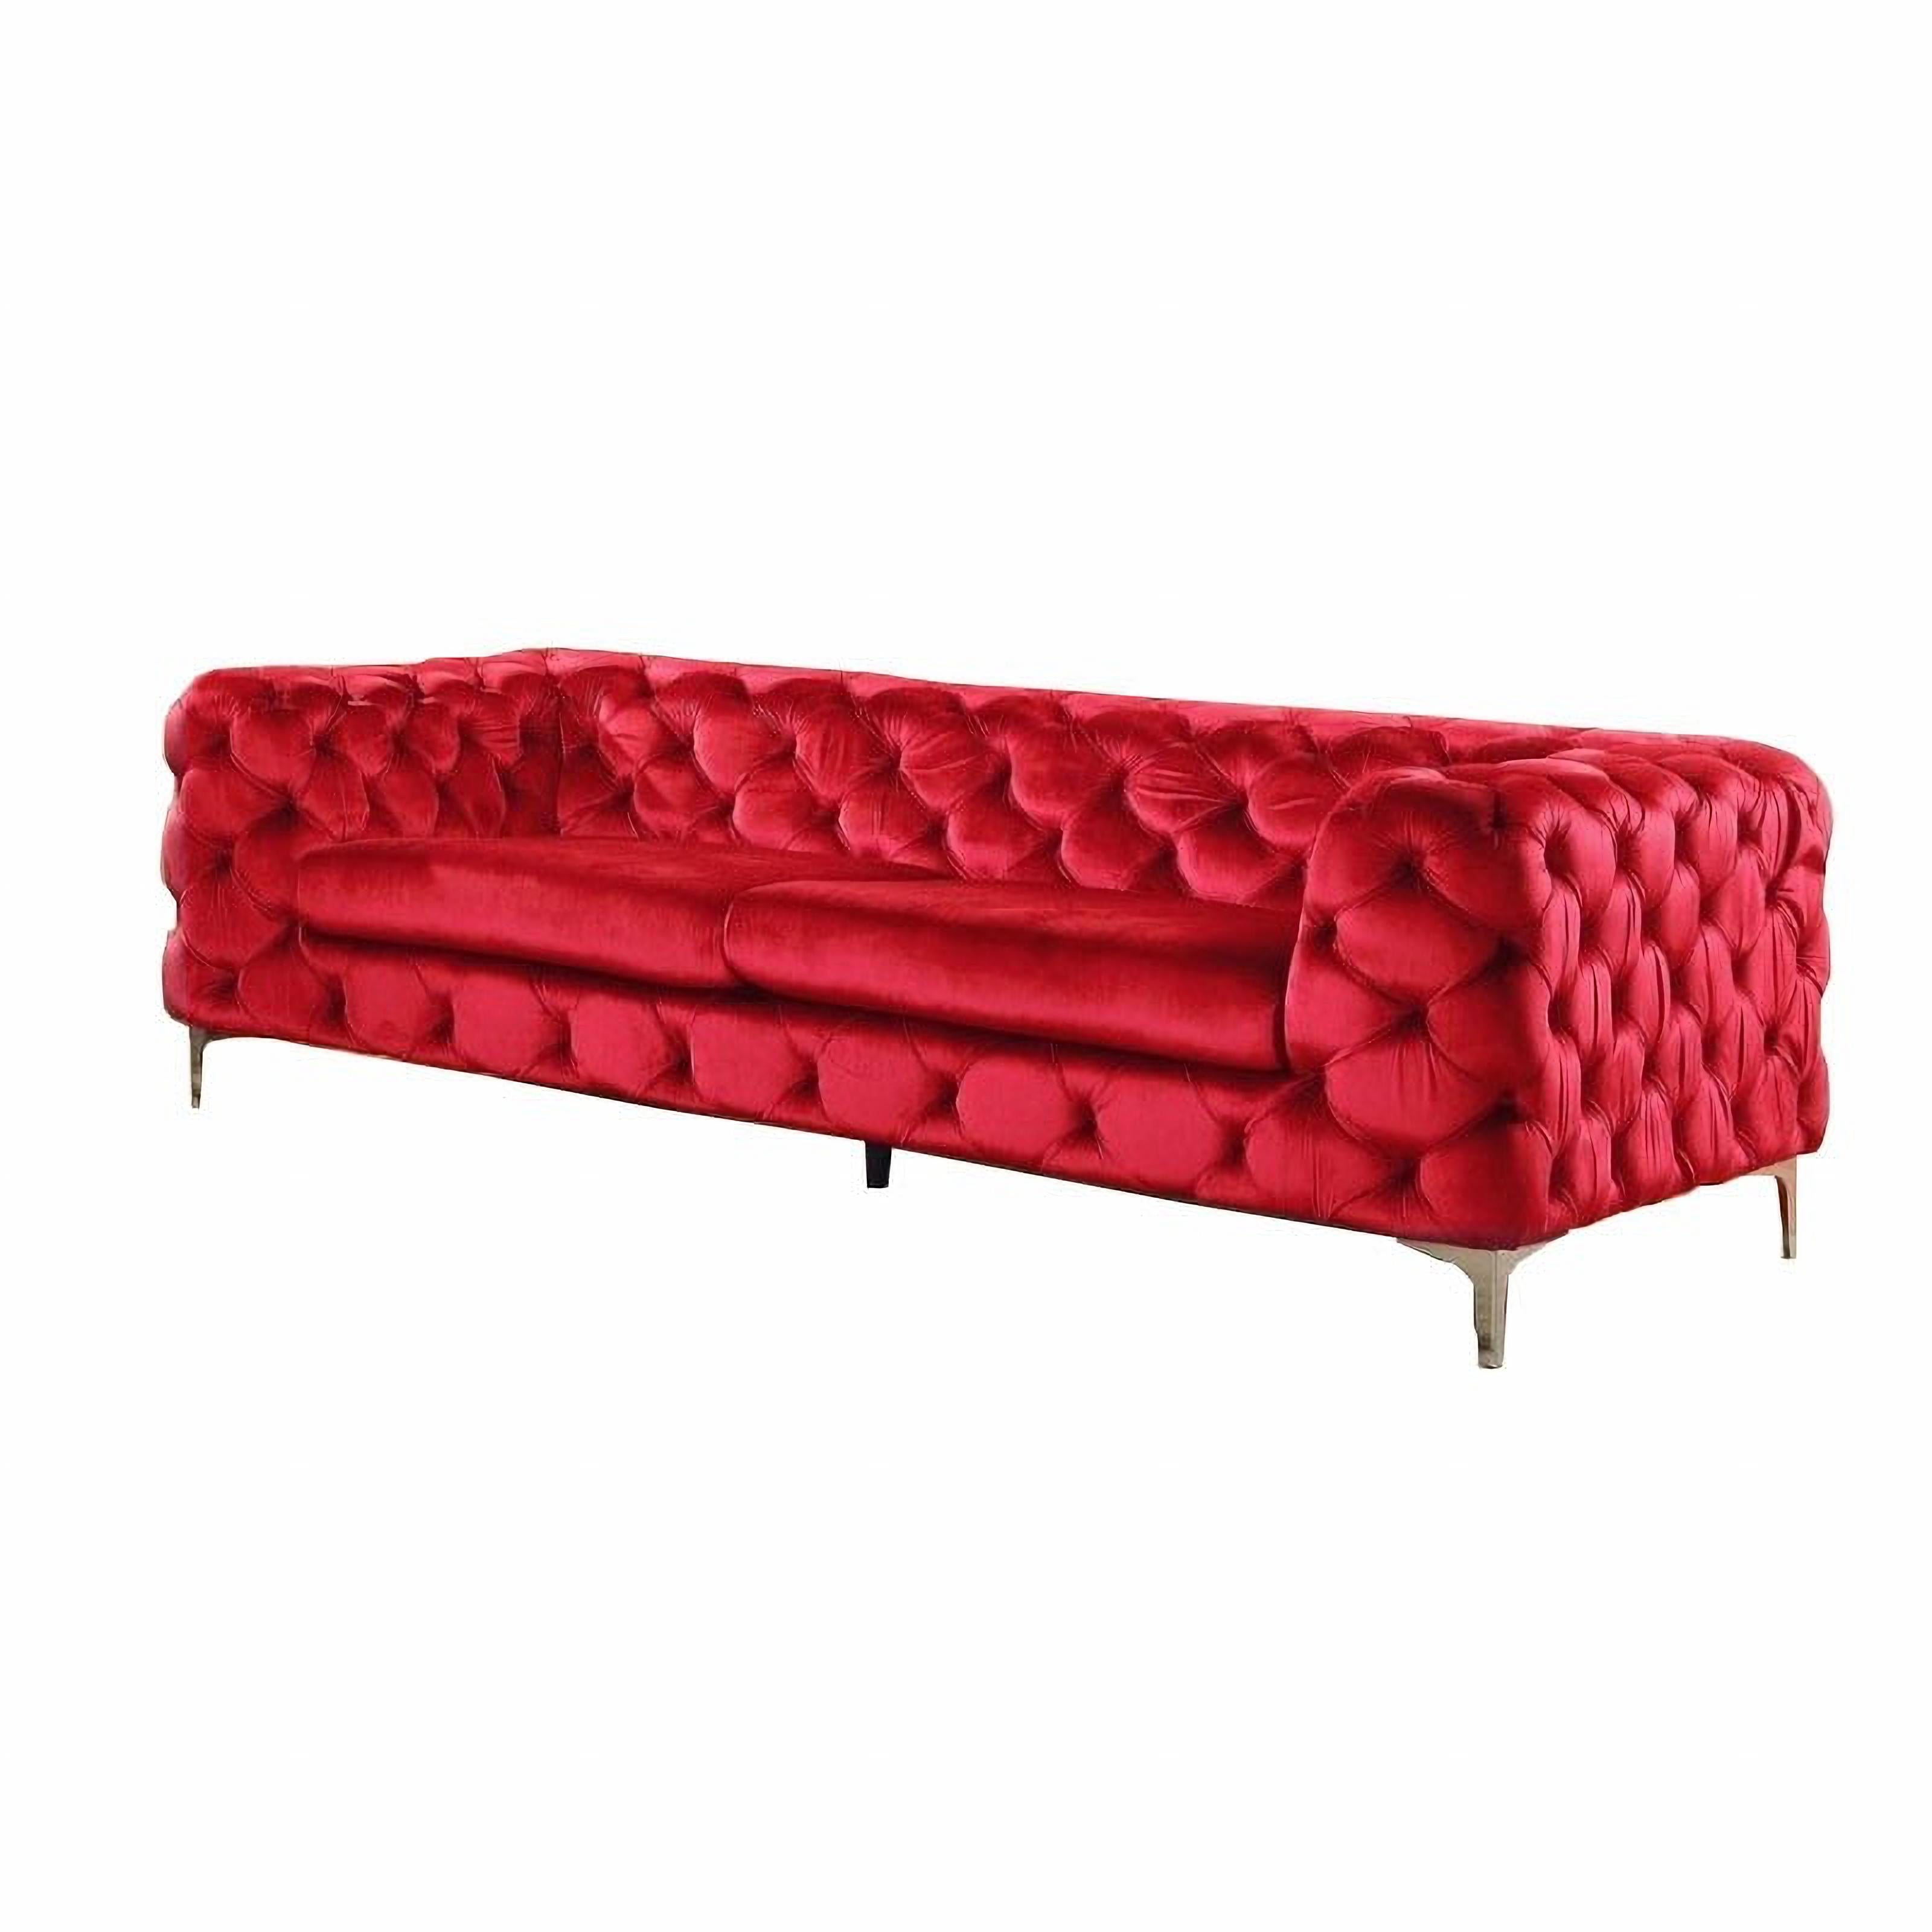 Hand-Crafted Chester 3 Seater Sofa, Red Wine Velvet New For Sale